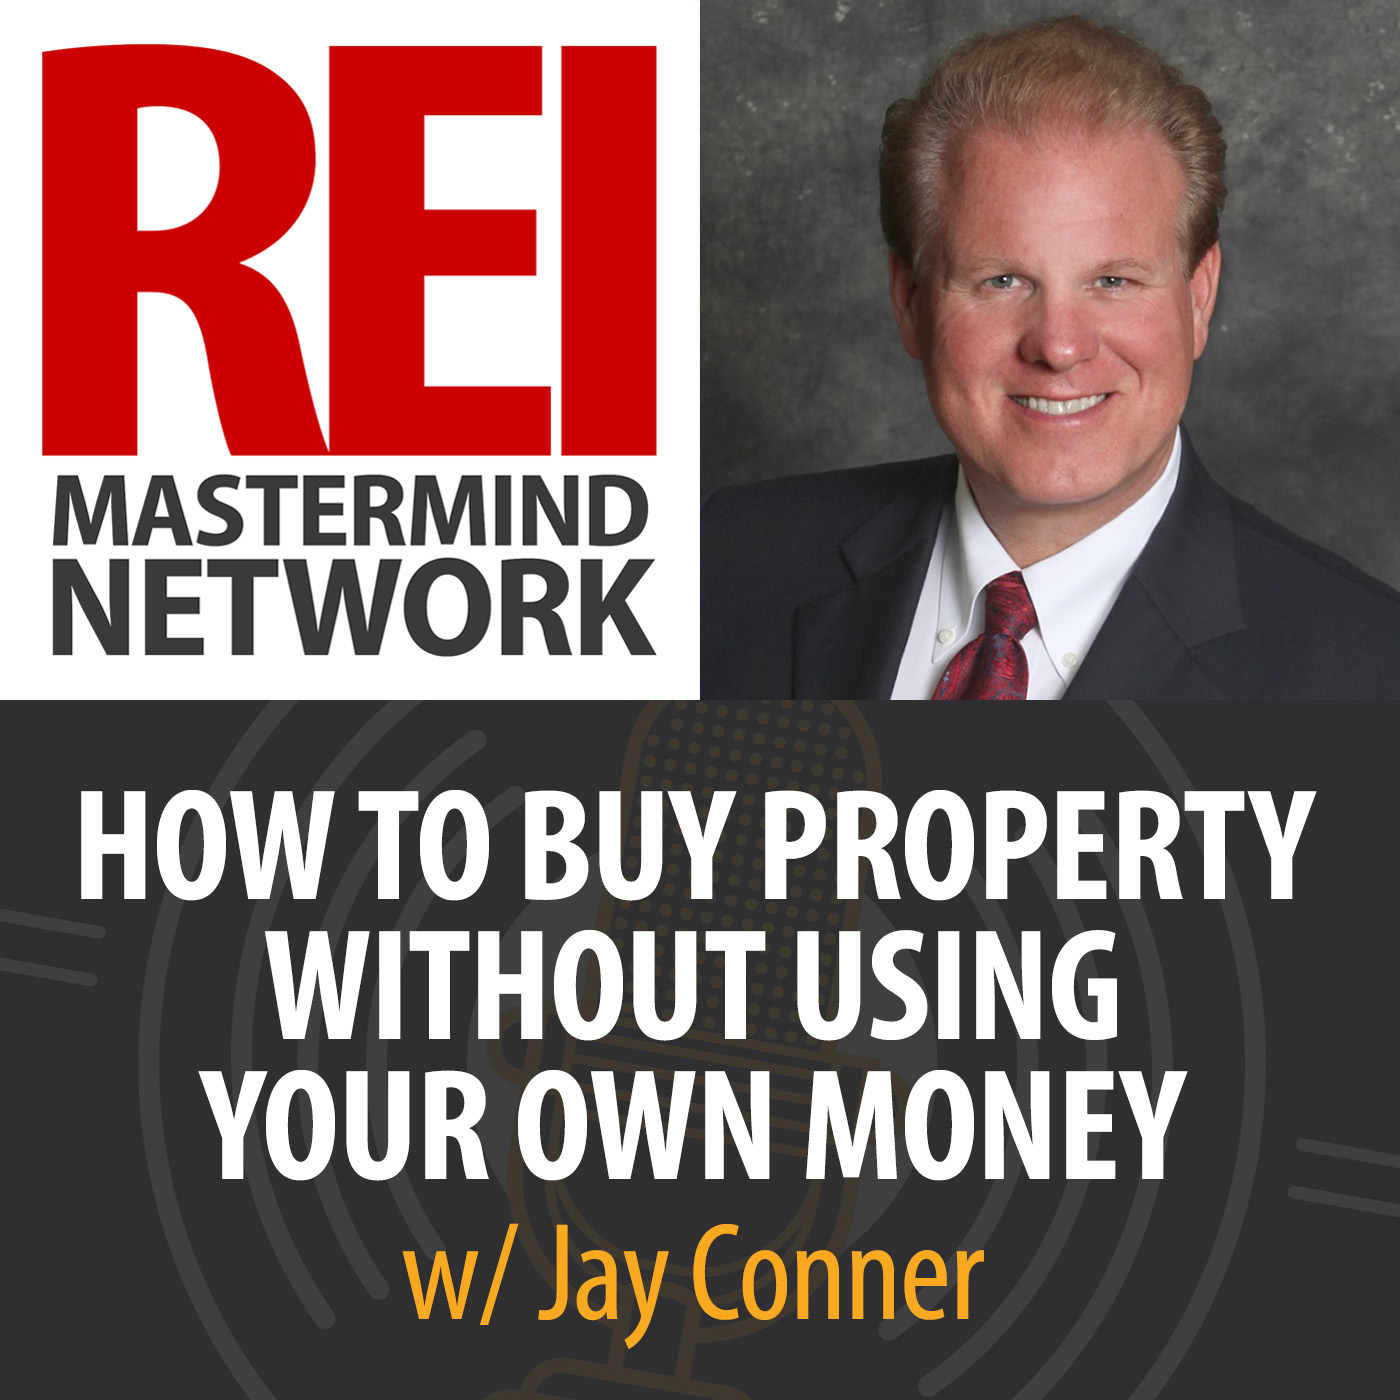 How to Buy Property Without Using Your Own Money with Jay Conner Image